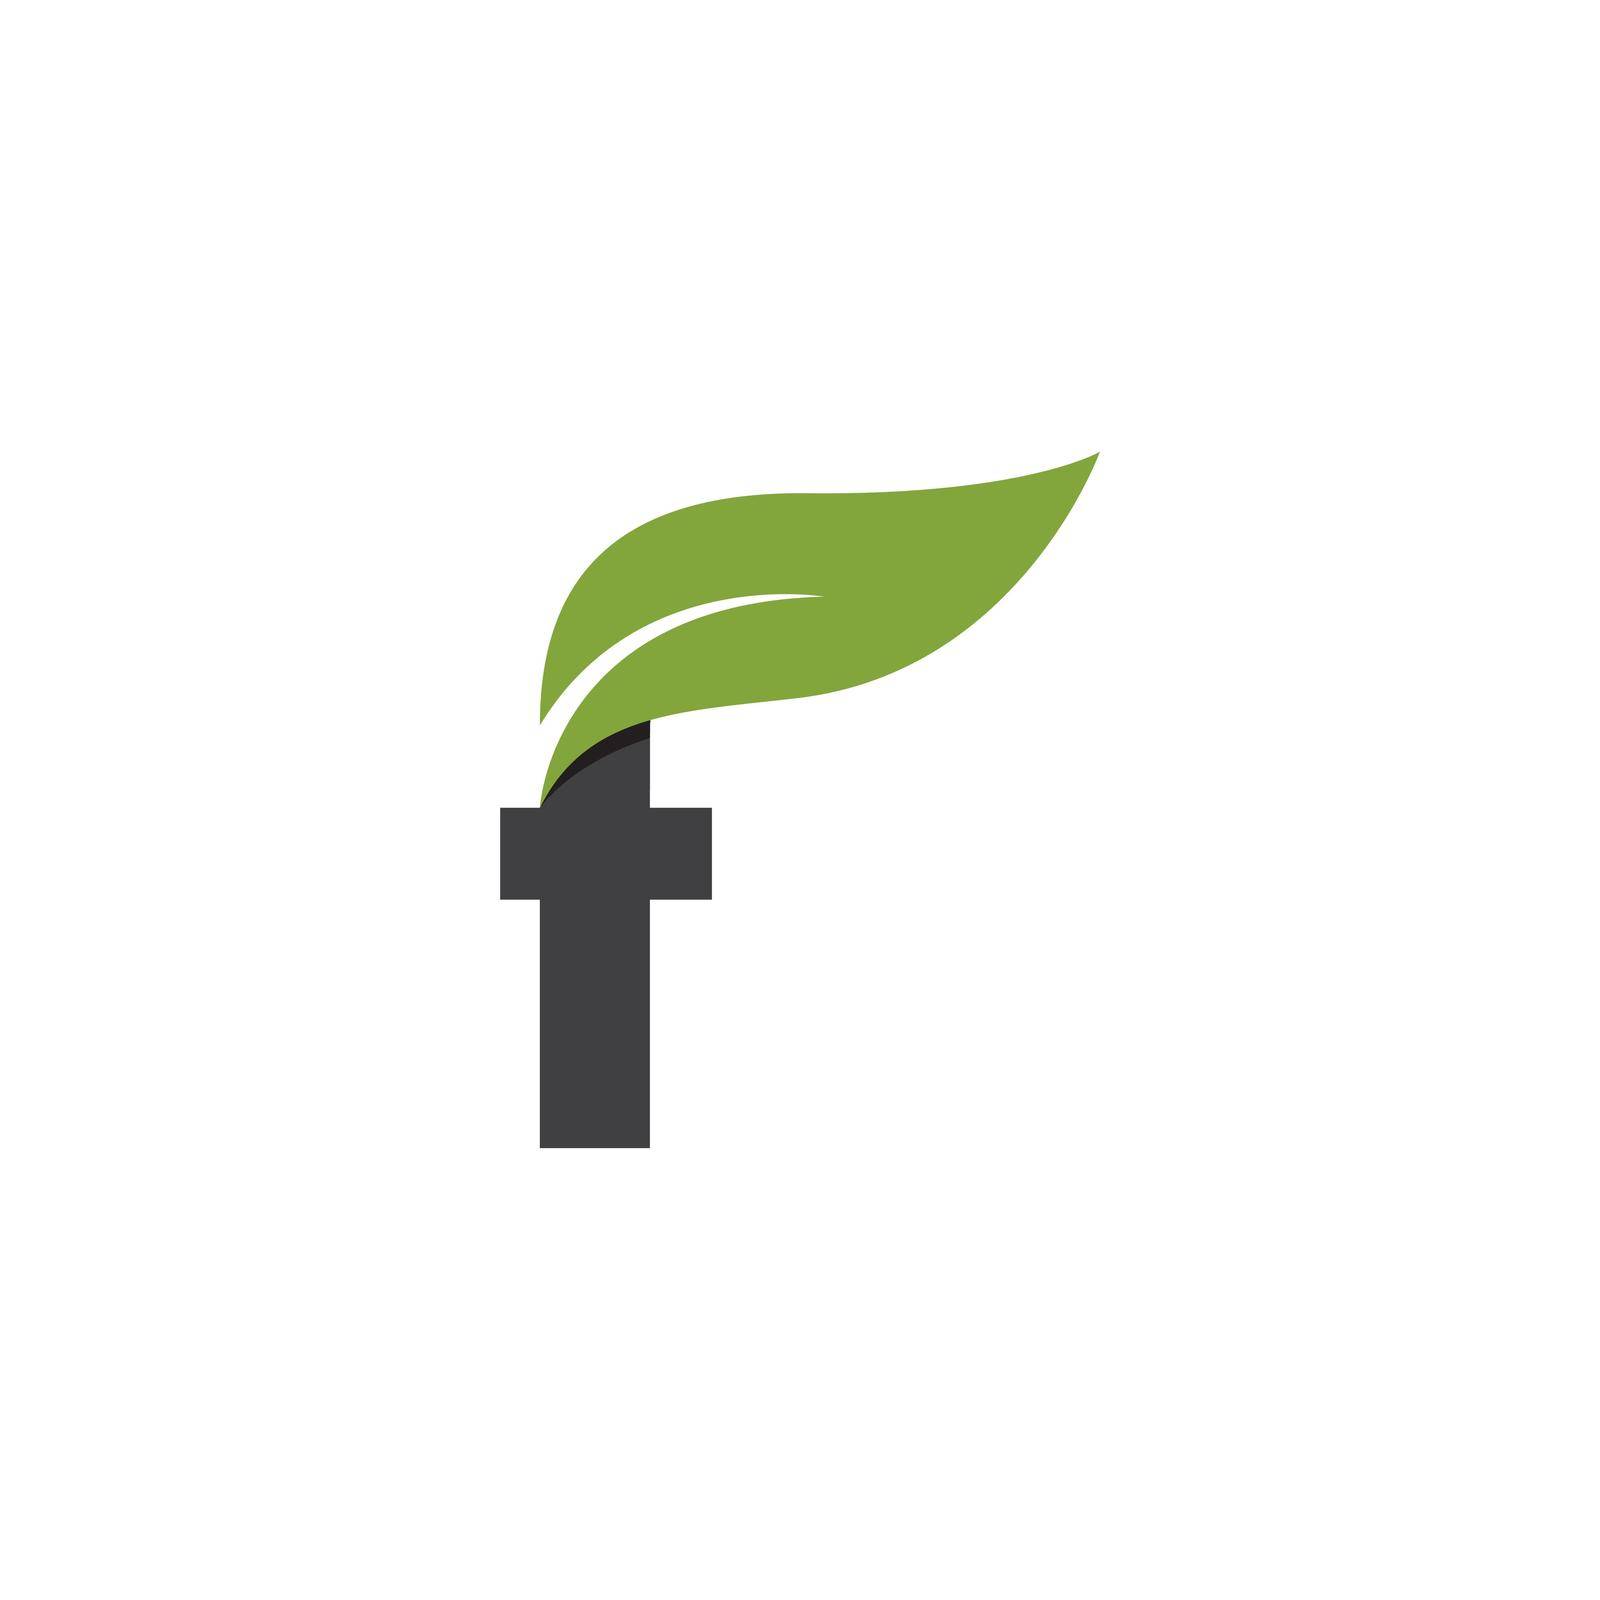 F Initial letter with green leaf